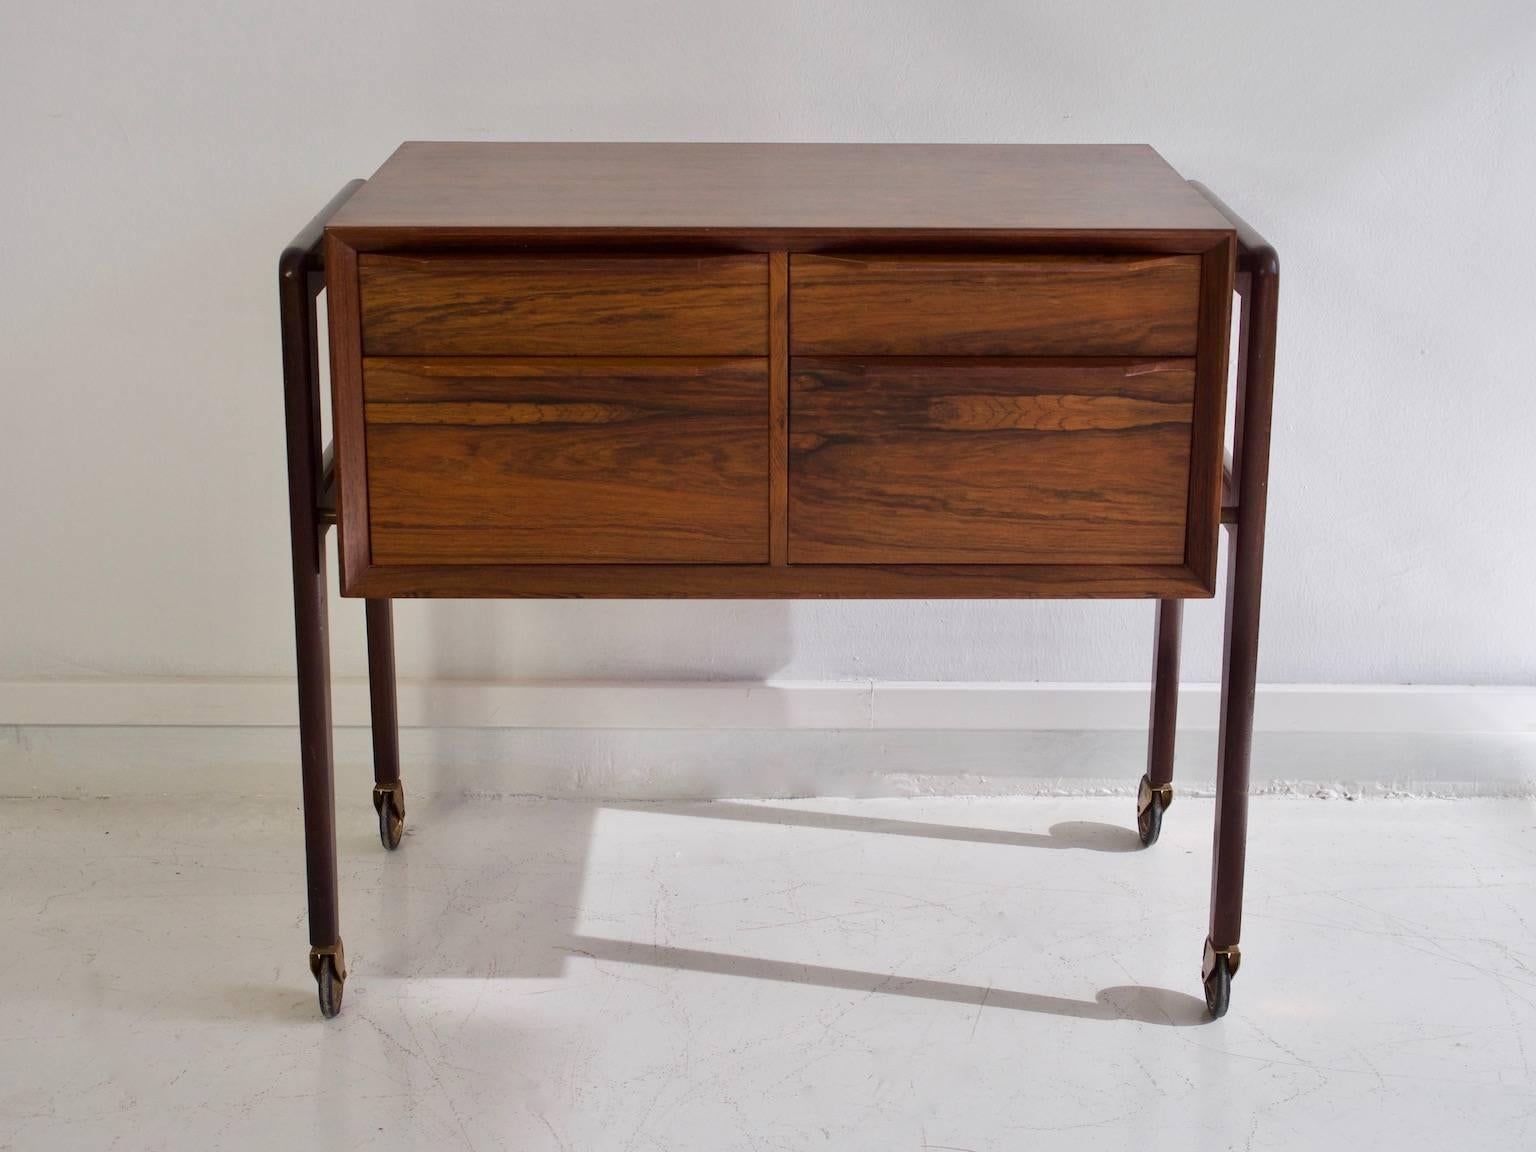 Rosewood commode, chest of drawers or sewing table. Front with four drawers, brass details. Measures: H 62, B 70, D 40 cm.